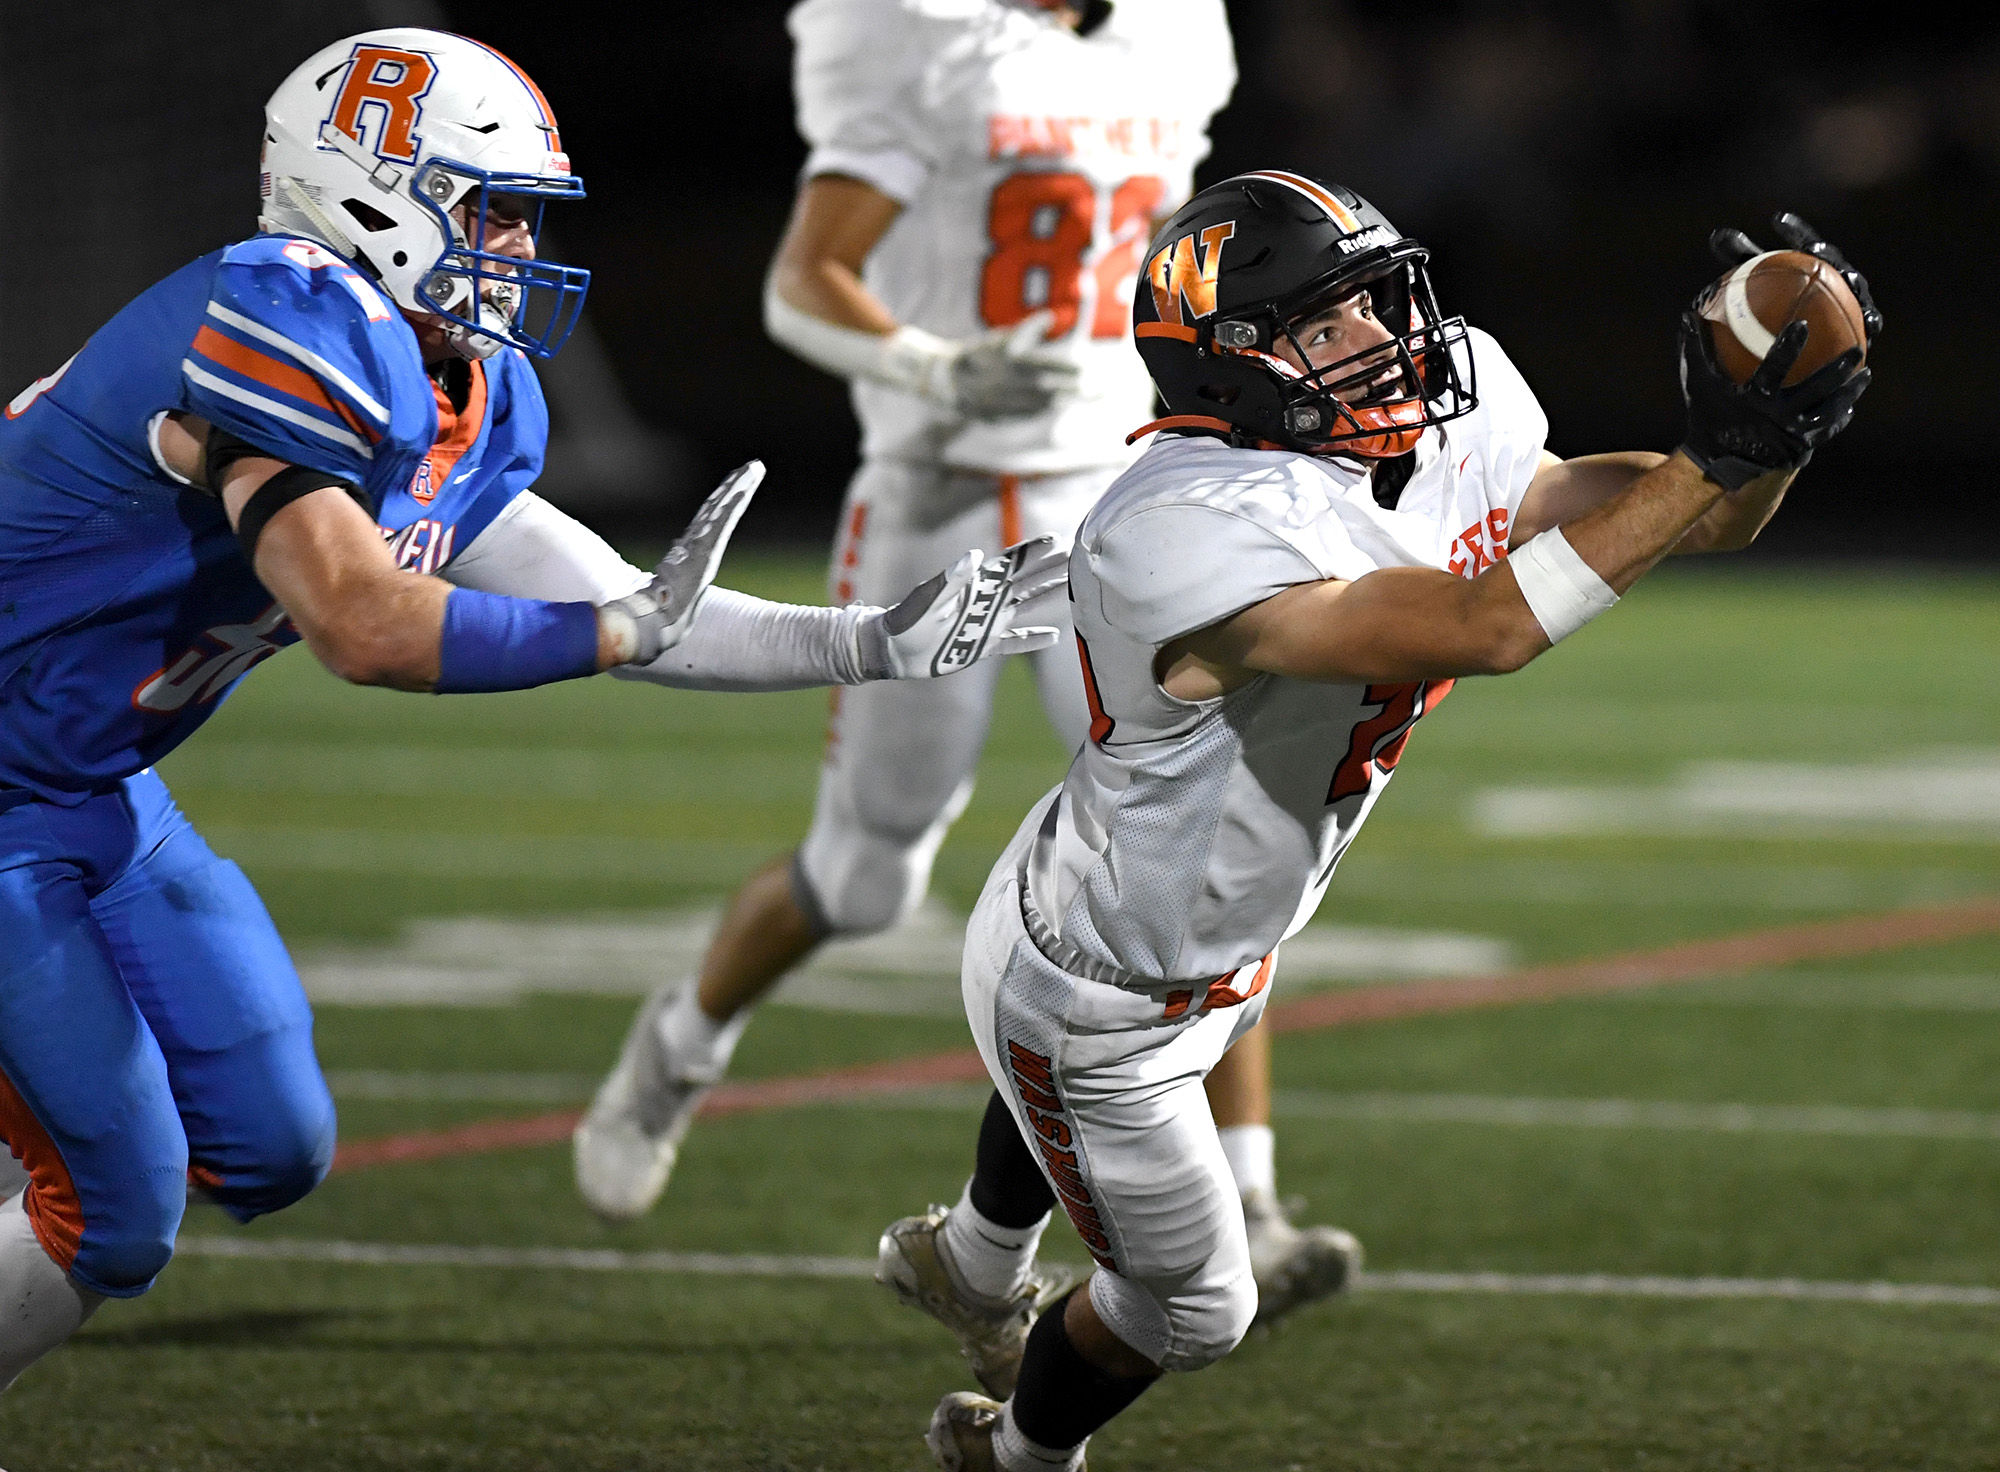 Washougal senior Talon Connelly, right, makes a diving reception Friday, Sept. 30, 2022, during a game between Washougal and Ridgefield at Ridgefield High School.